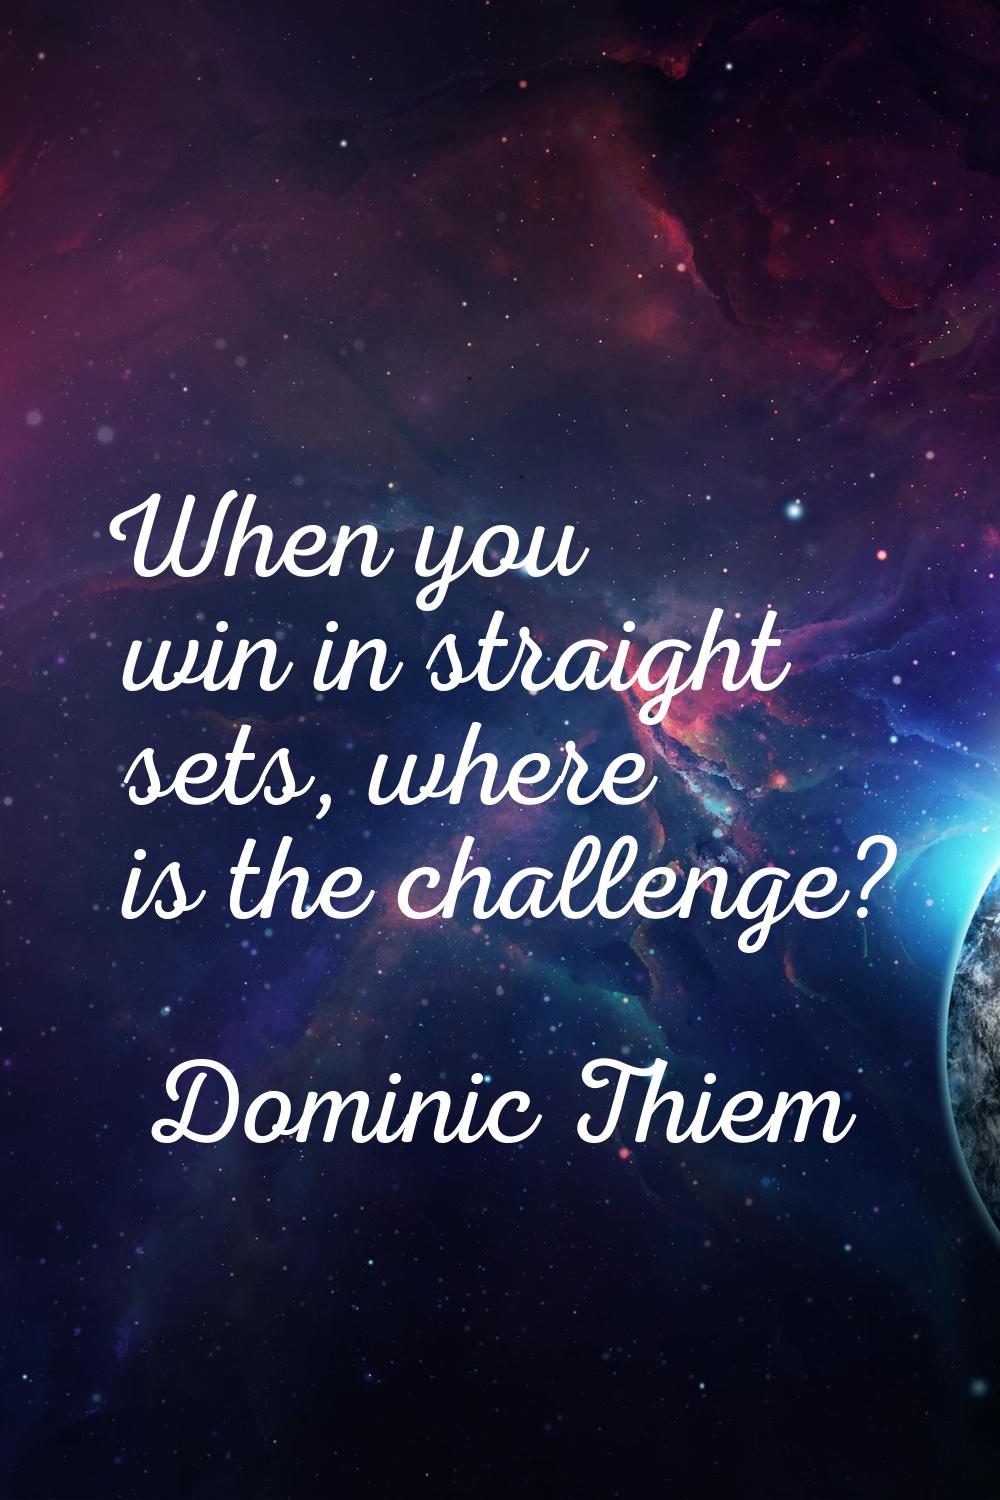 When you win in straight sets, where is the challenge?